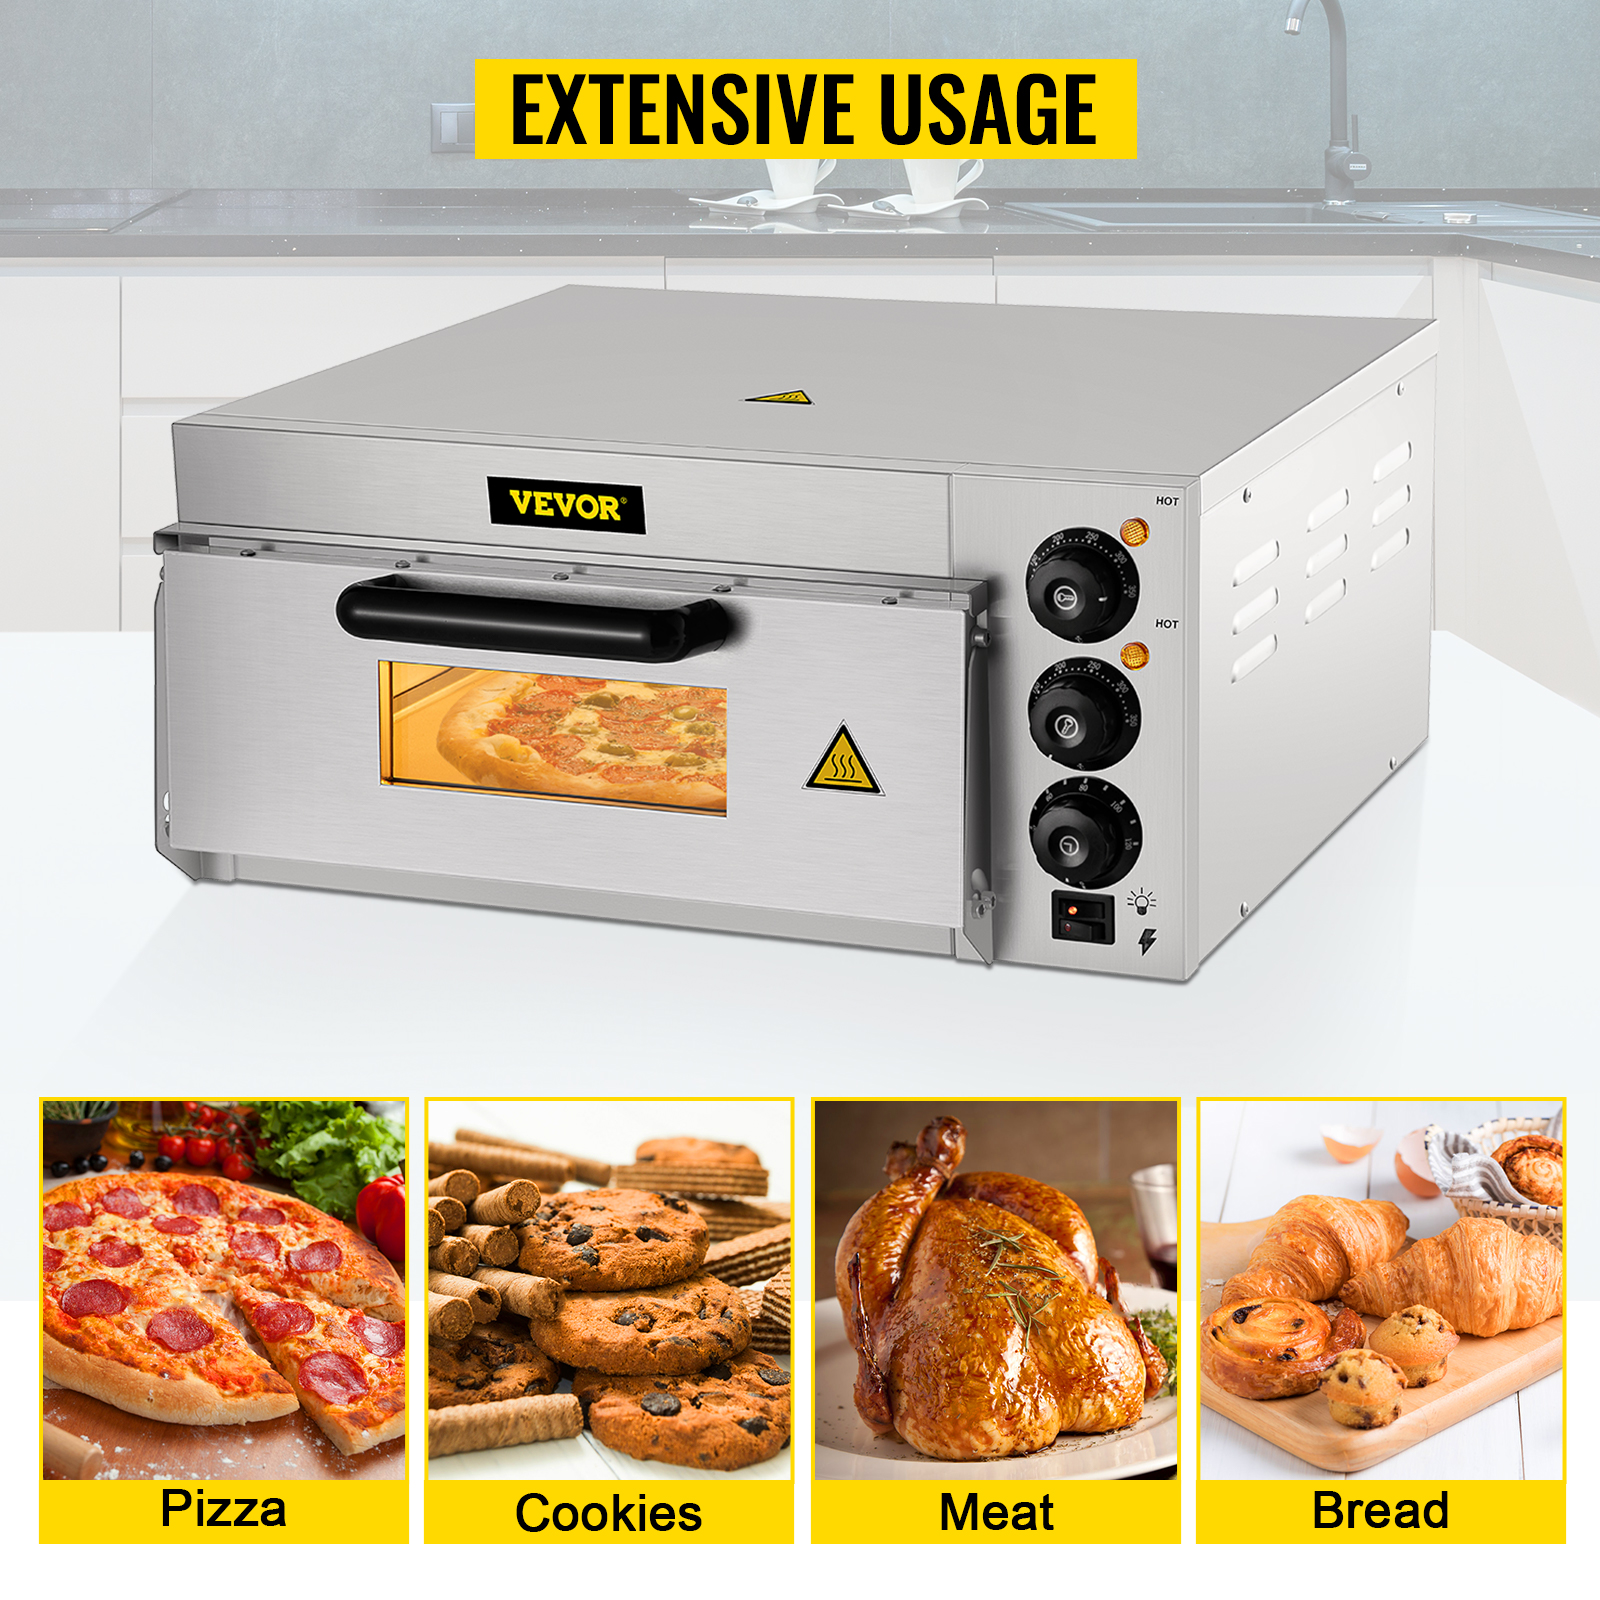 https://d2qc09rl1gfuof.cloudfront.net/product/LXBSKX141110V8IFH/commercial-pizza-oven-m100-7.jpg